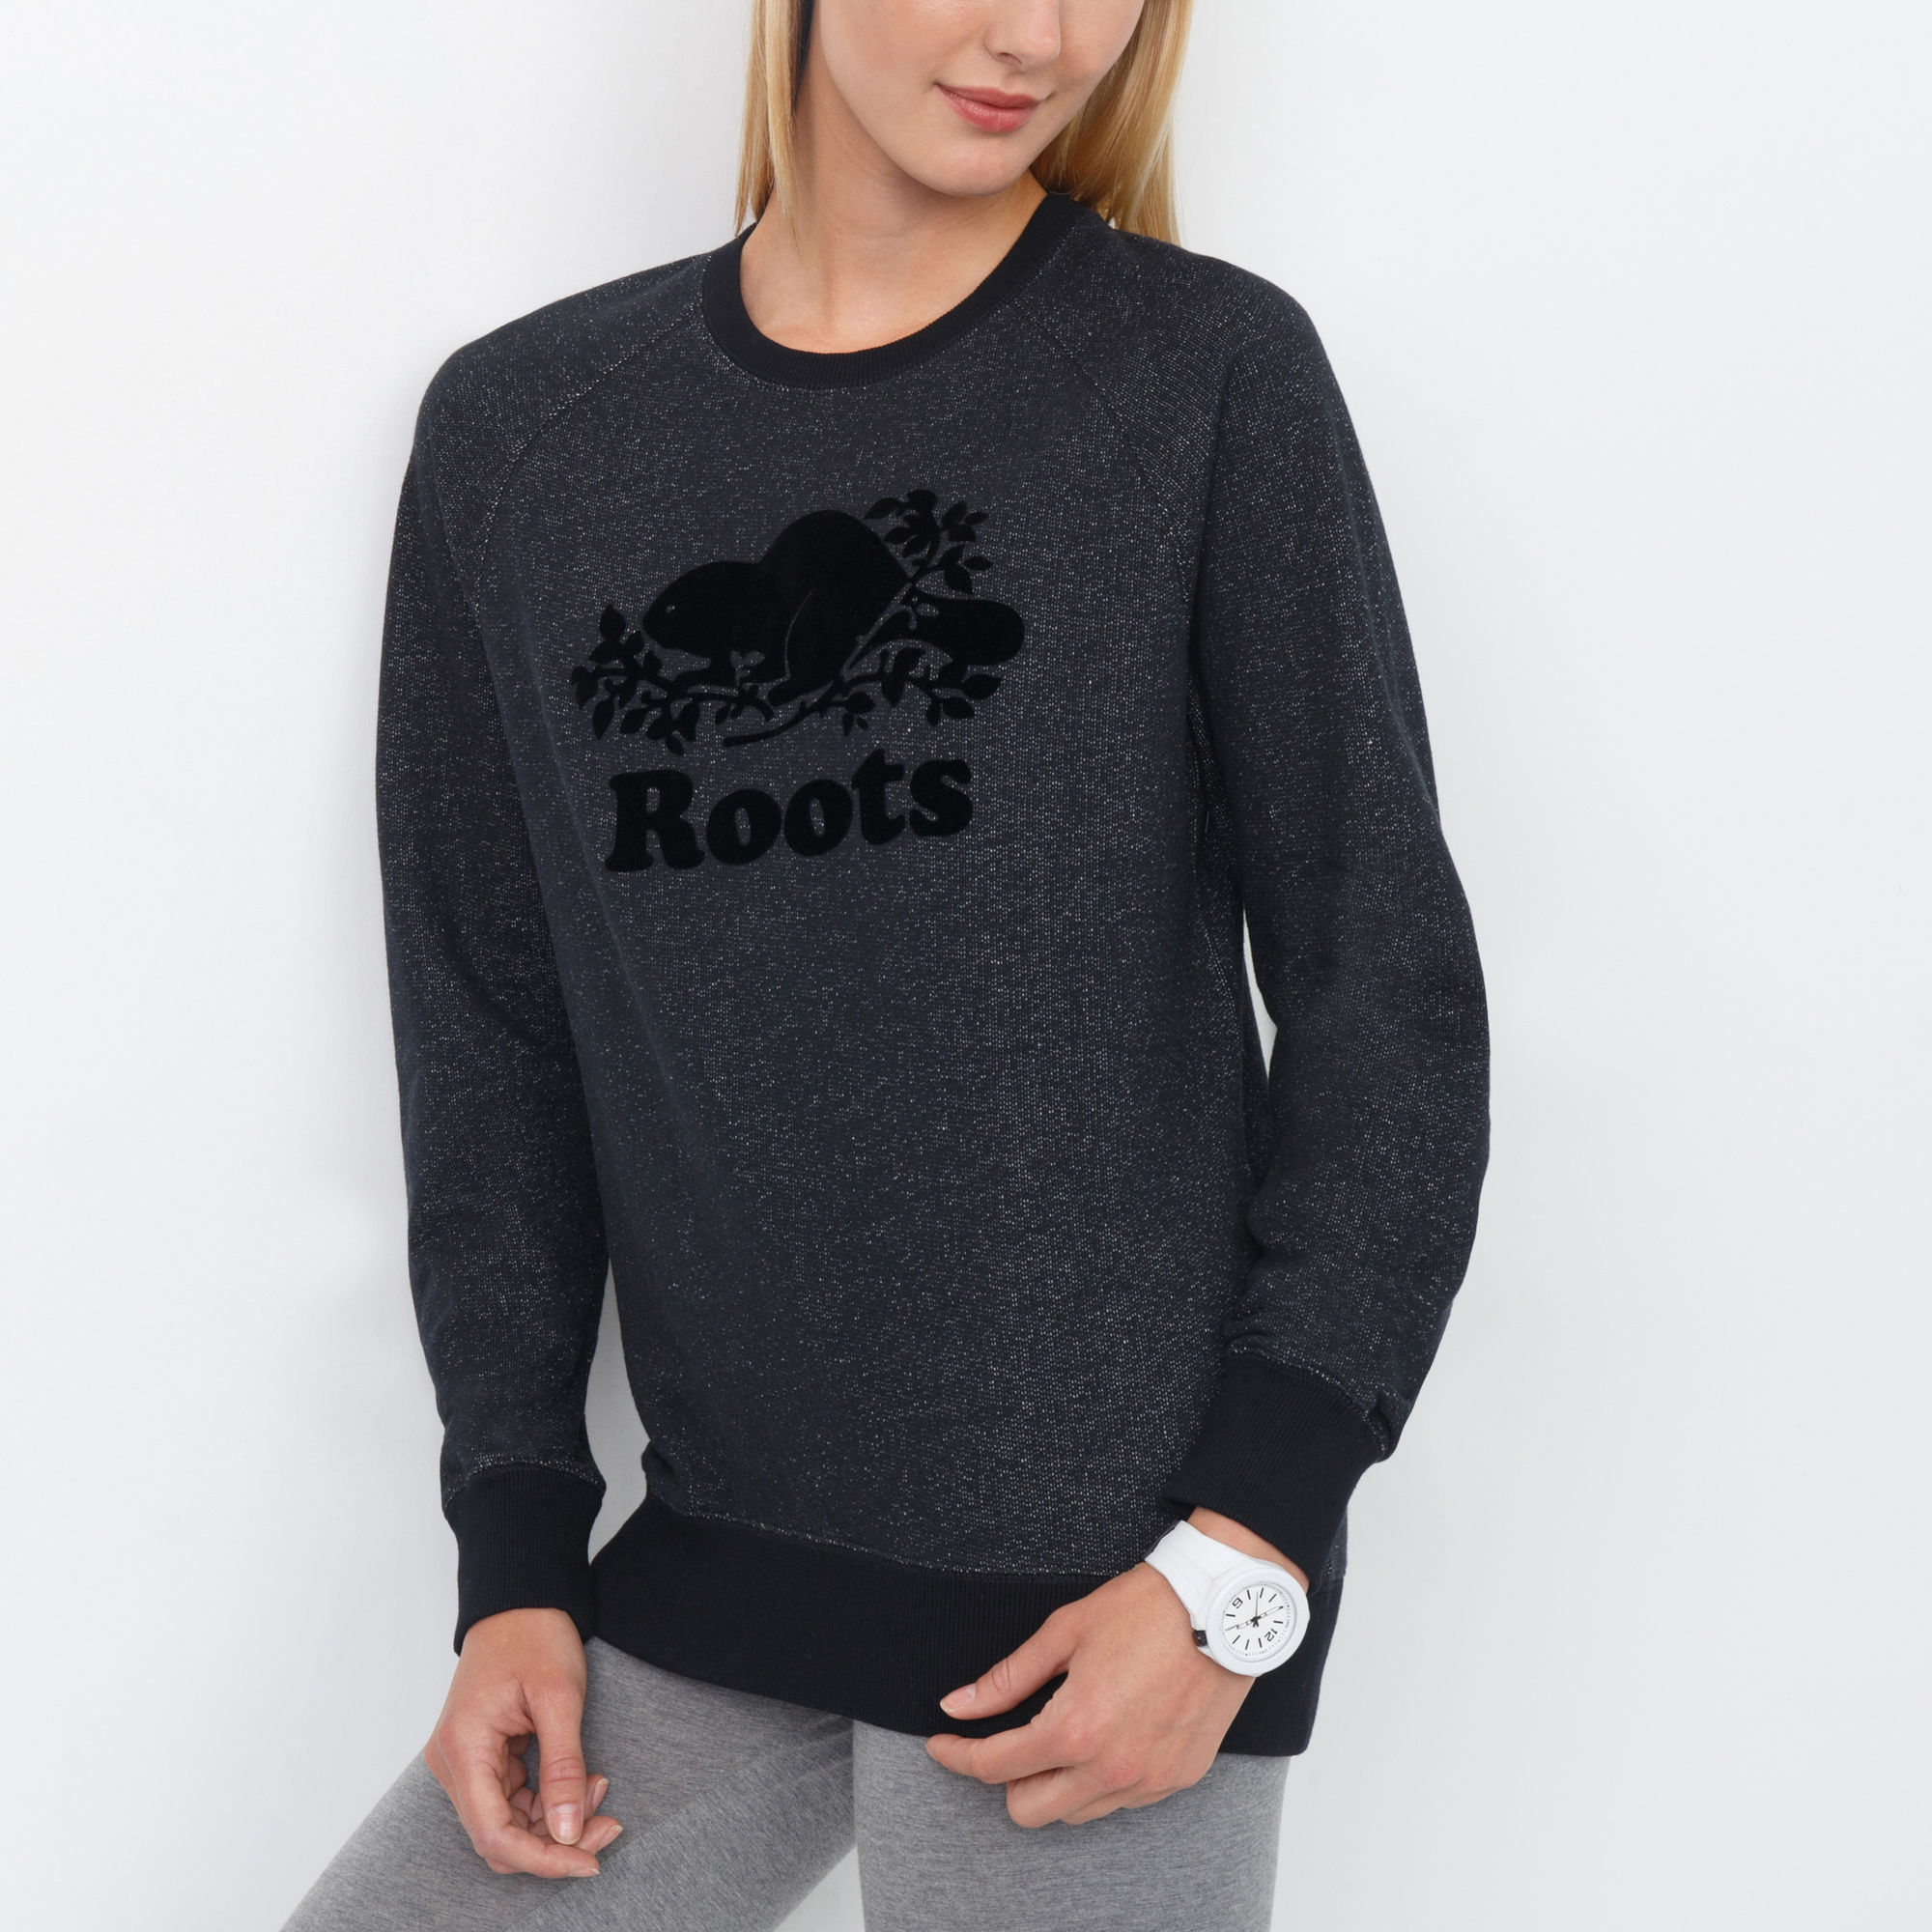 Roots Canada Sale: Save 30% off Sweats for Women, Men and Kids! | Canadian Freebies, Coupons ...